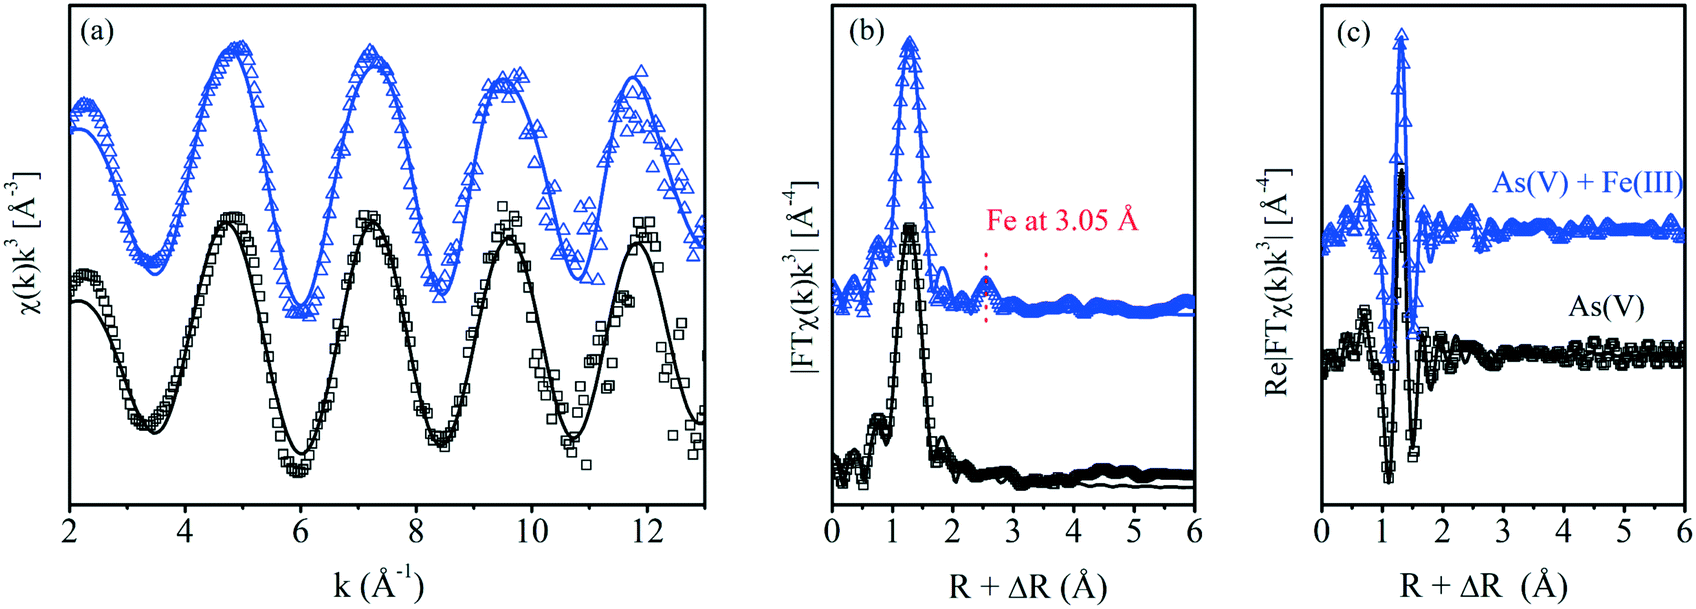 Formation Of Fe Iii As V Complexes Effect On The Solubility Of Ferric Hydroxide Precipitates And Molecular Structural Identification Environmental Science Nano Rsc Publishing